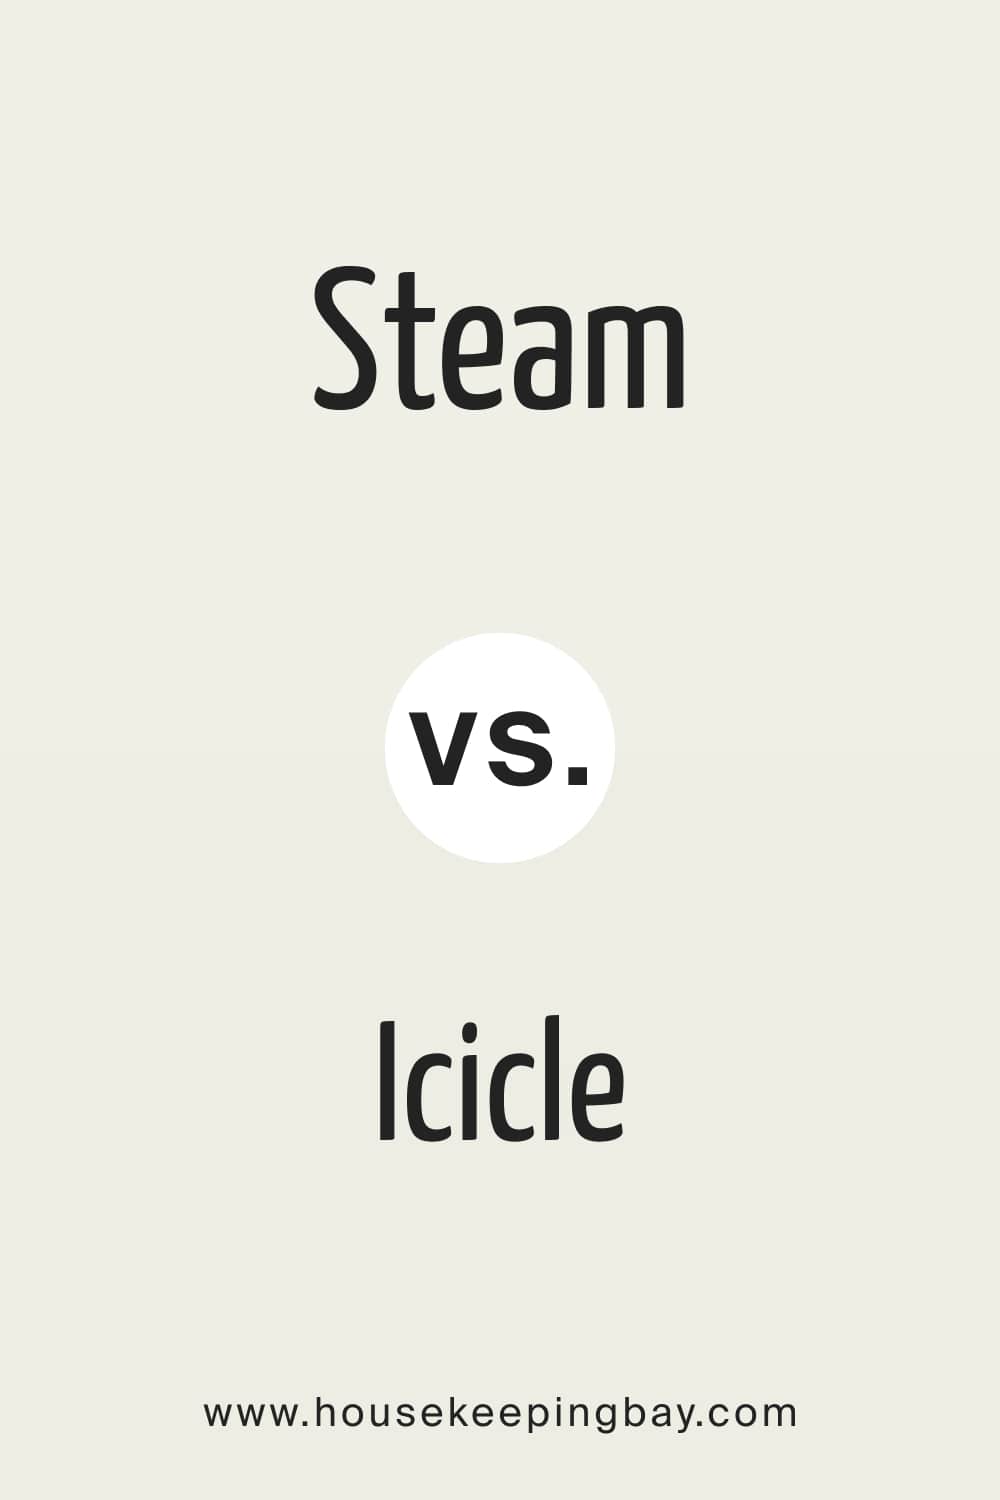 Steam vs Icicle